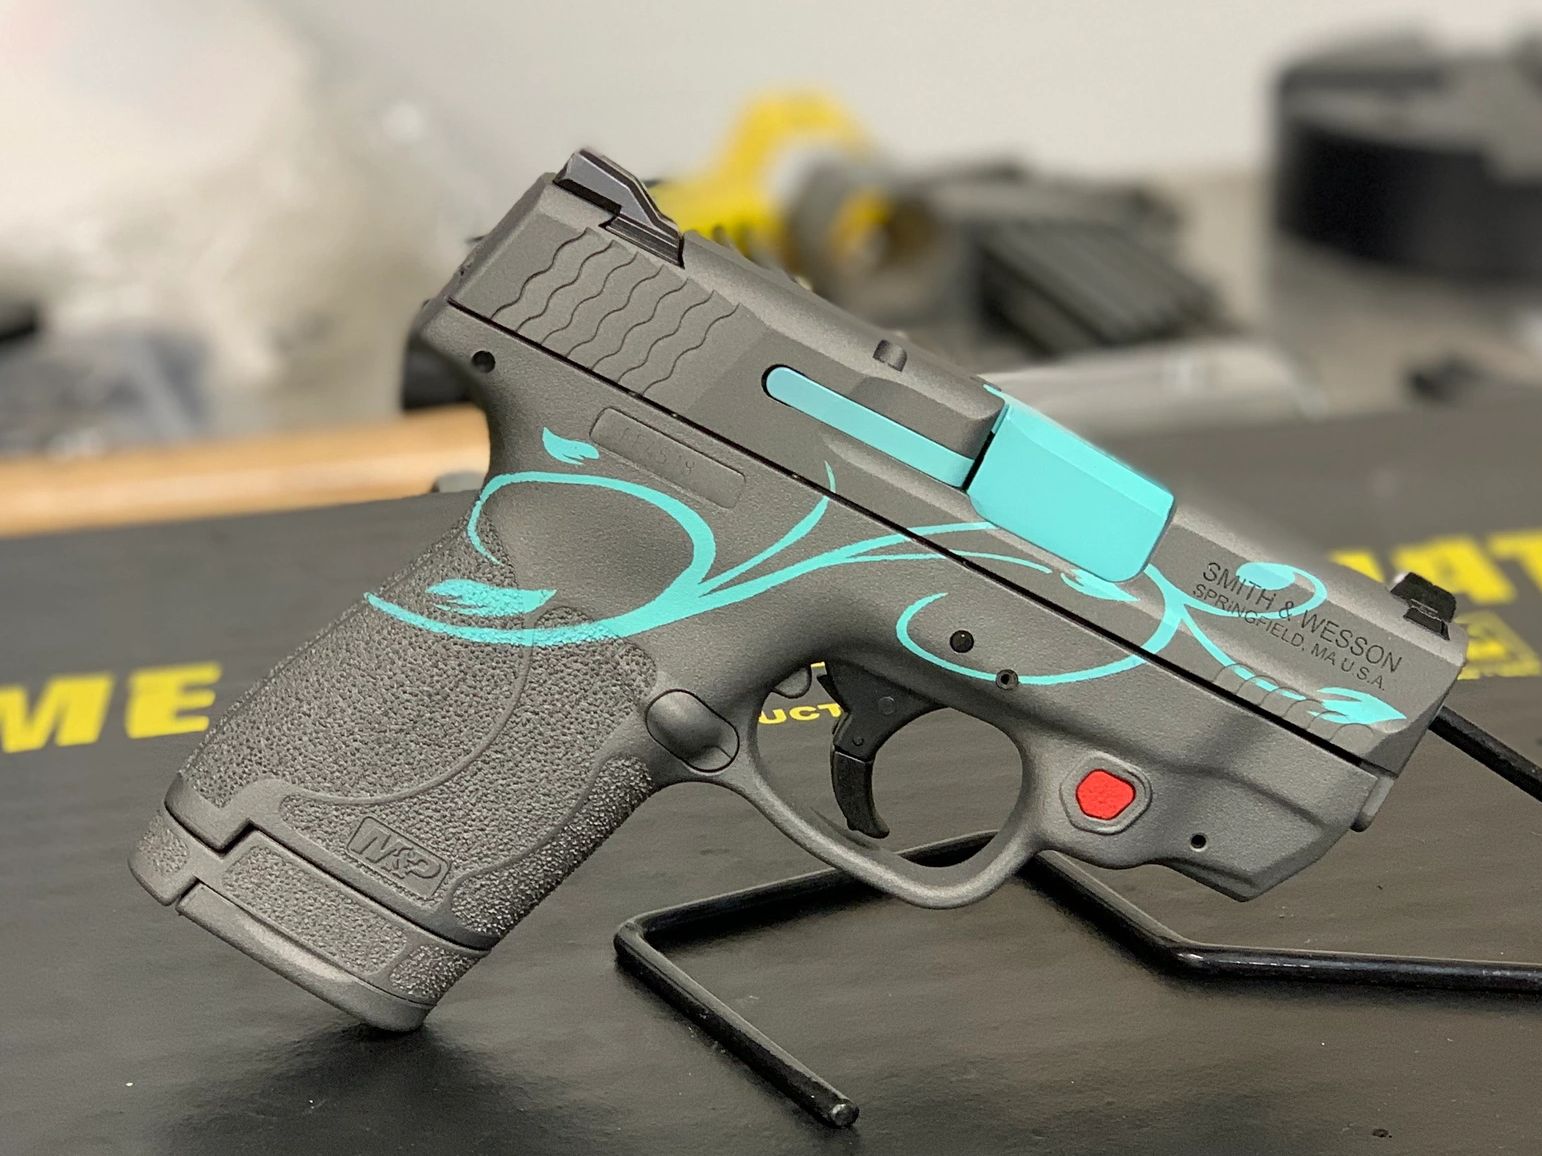 M&P in Tungsten with Robin Egg Blue floral design